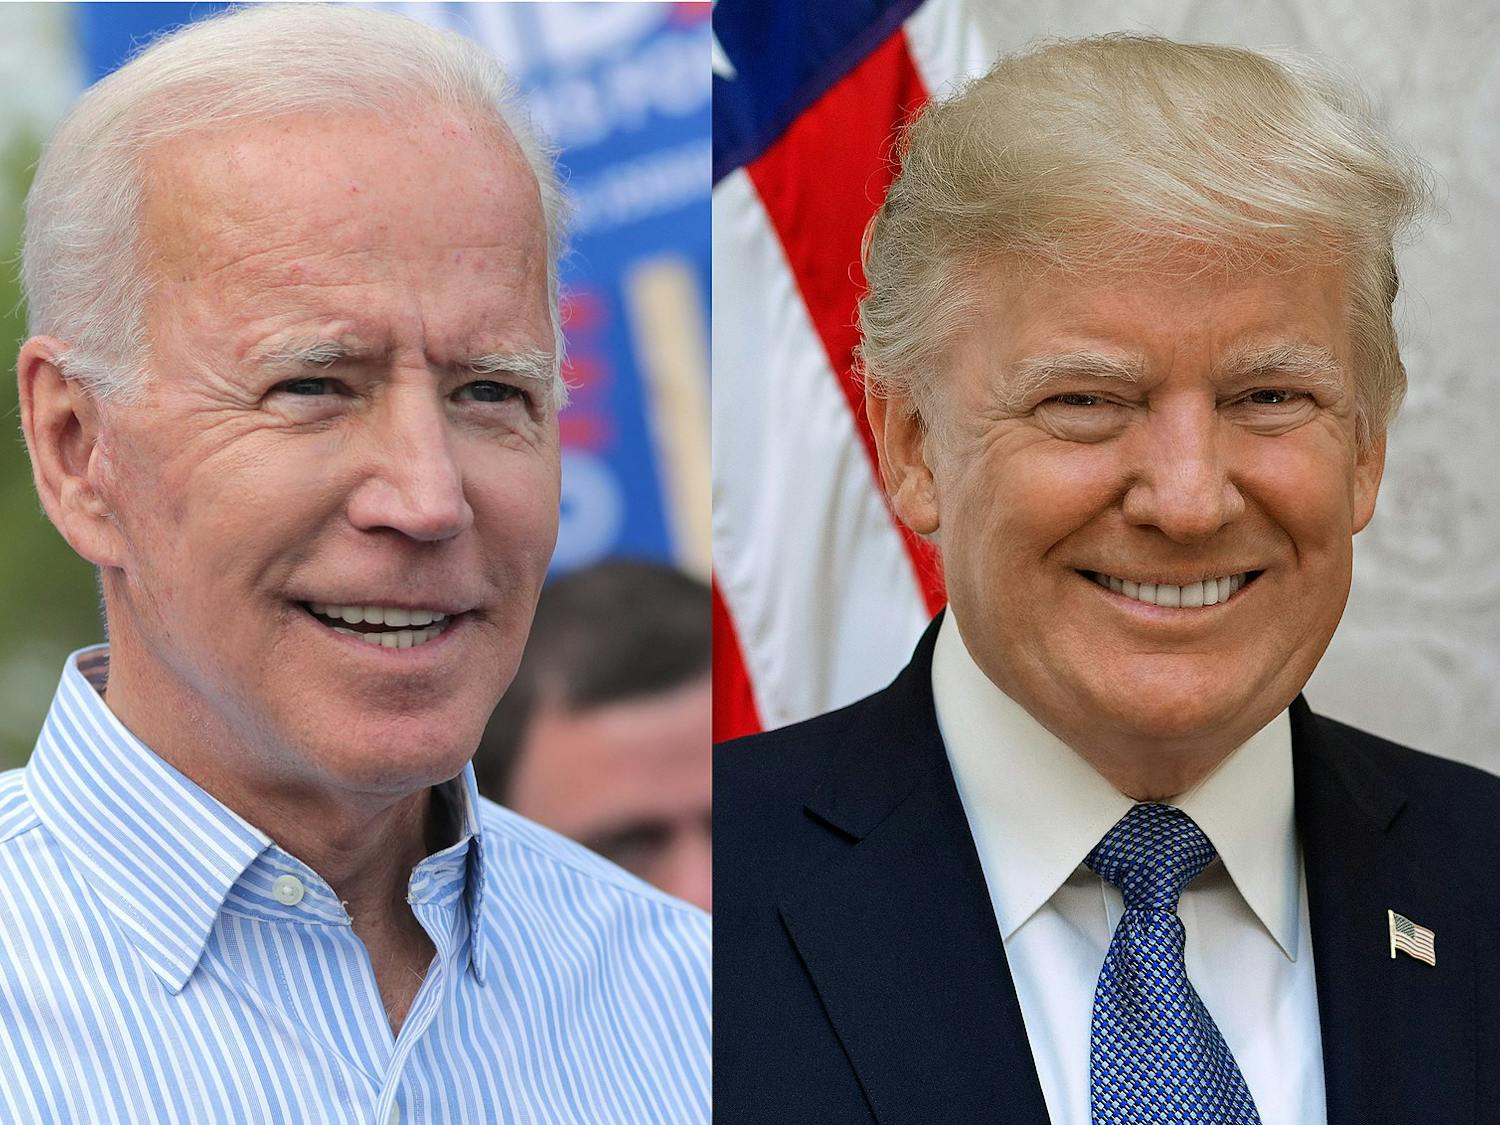 With the 2024 presidential election a year away, new polls are predicting who may win in the upcoming election (Photo courtesy of Wikimedia Commons / “Joe Biden and Donald Trump” by Gage Skidmore (Biden), Shealah Craighead (Trump), krassotkin (combination). November 4, 2020). 